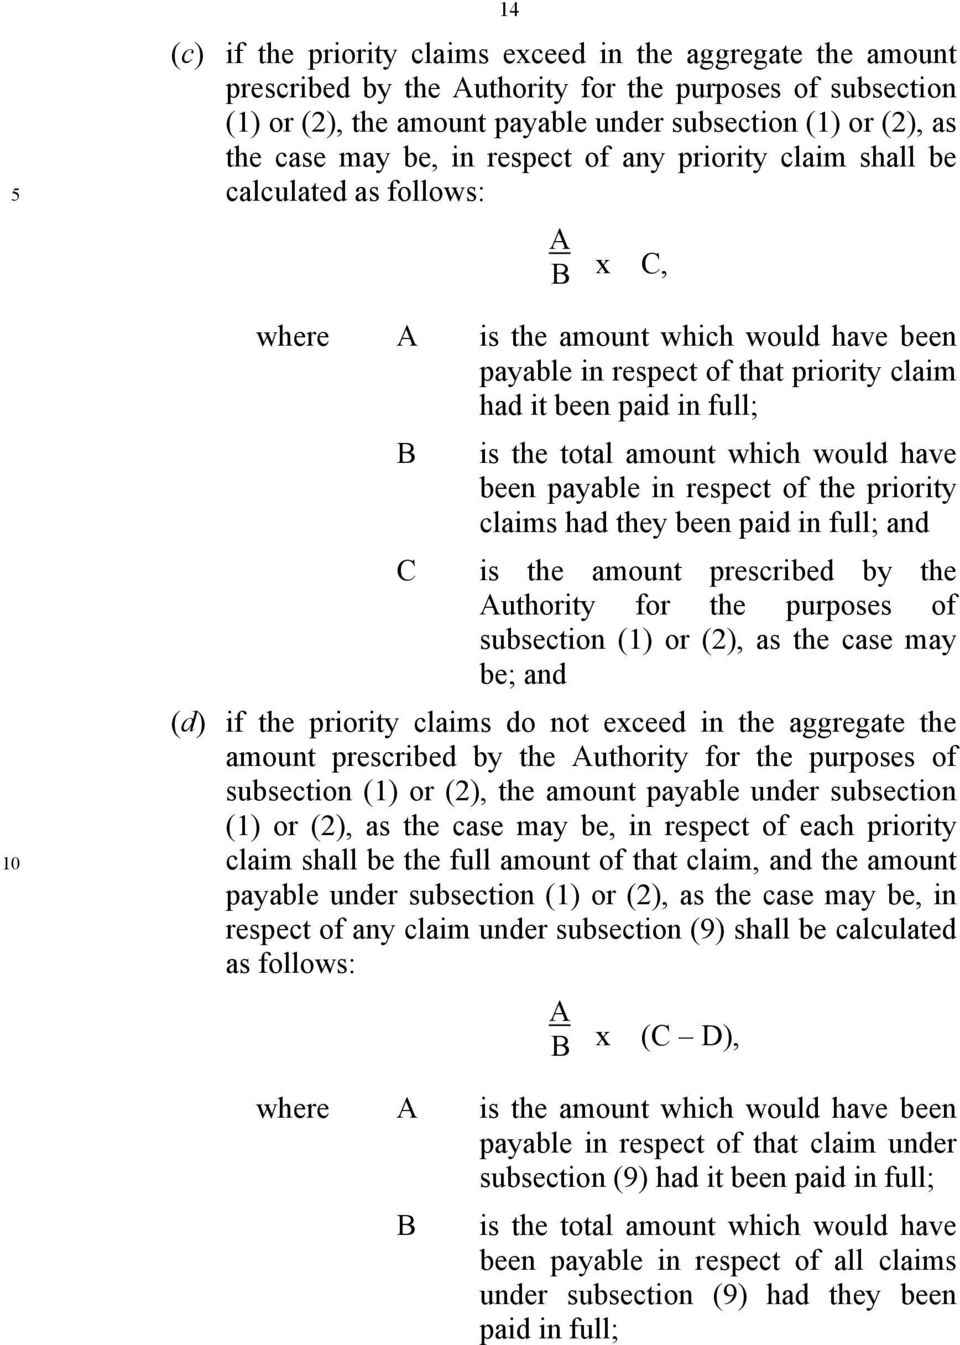 total amount which would have been payable in respect of the priority claims had they been paid in full; and C is the amount prescribed by the Authority for the purposes of subsection (1) or (2), as